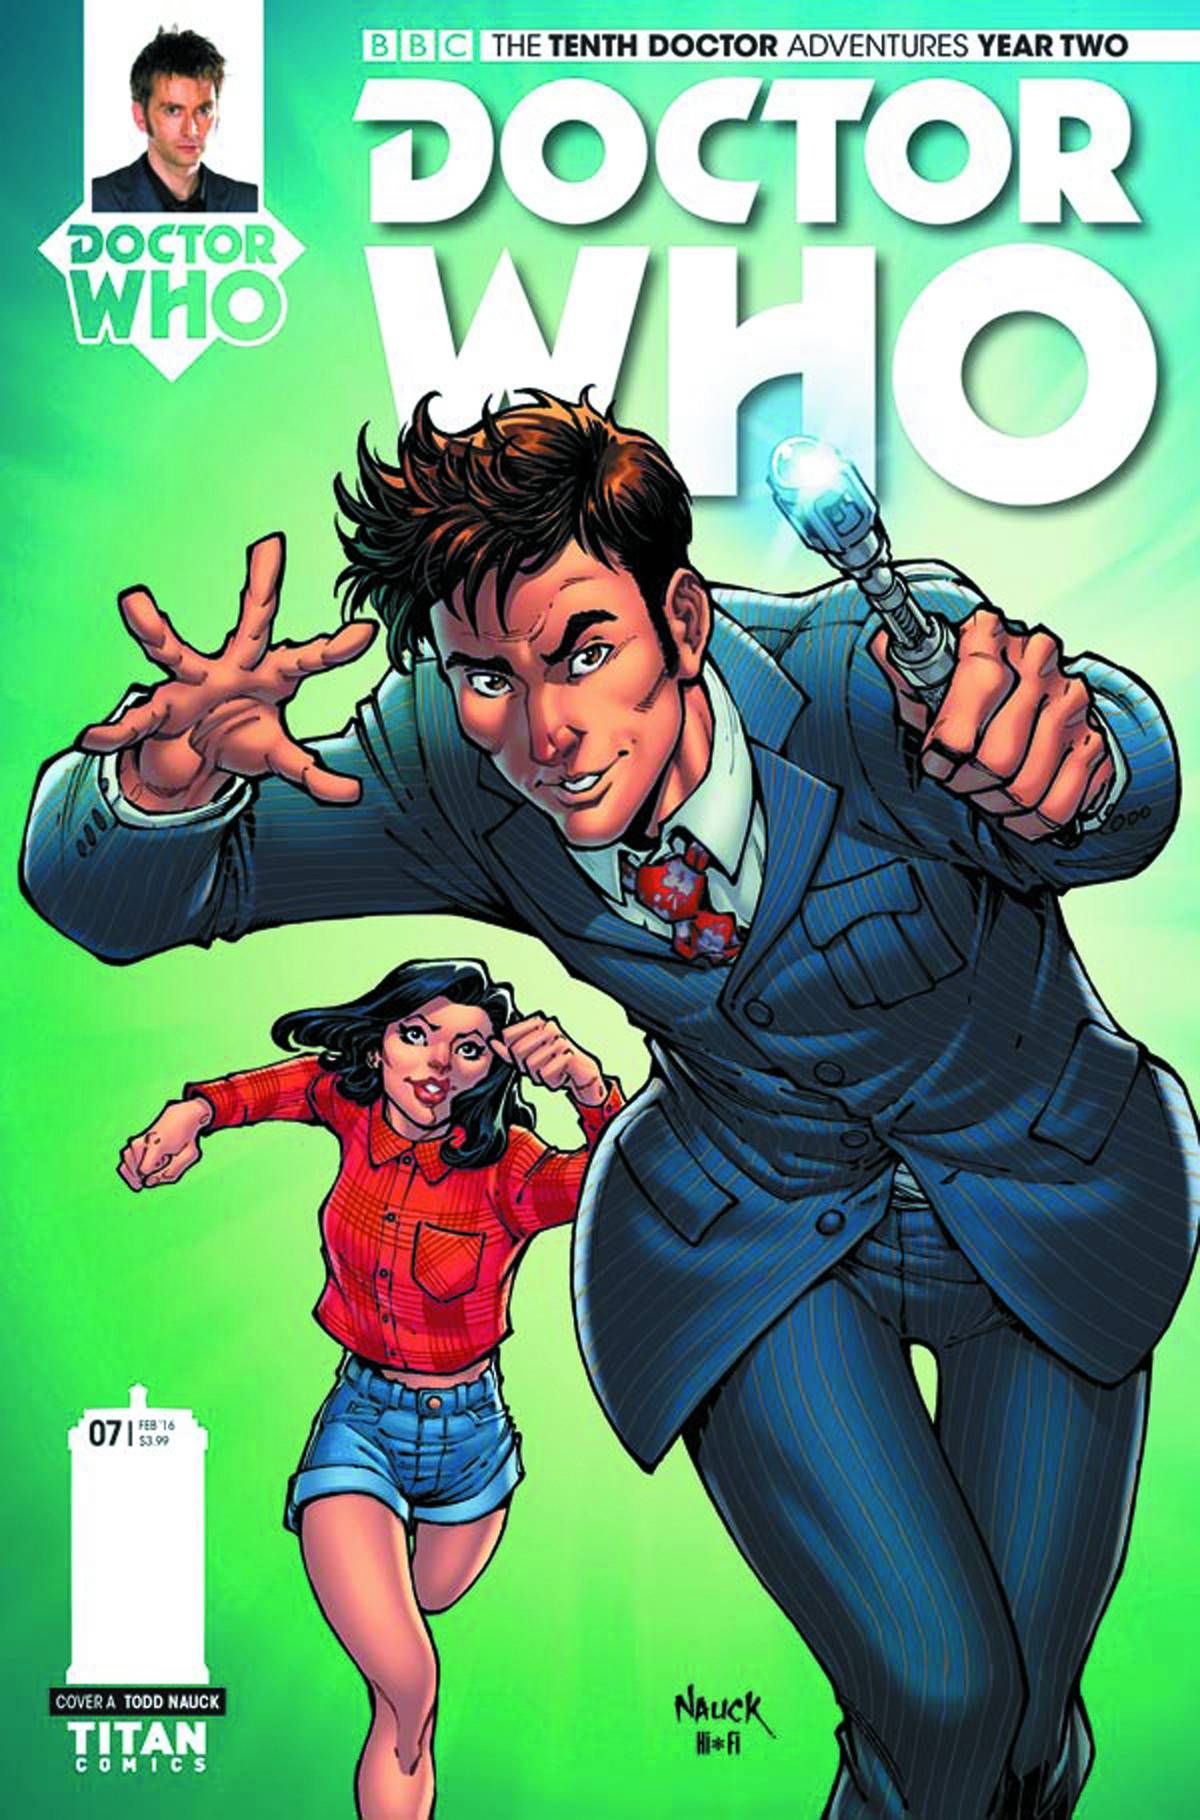 Doctor Who: 10th Doctor - Year Two #7 Comic